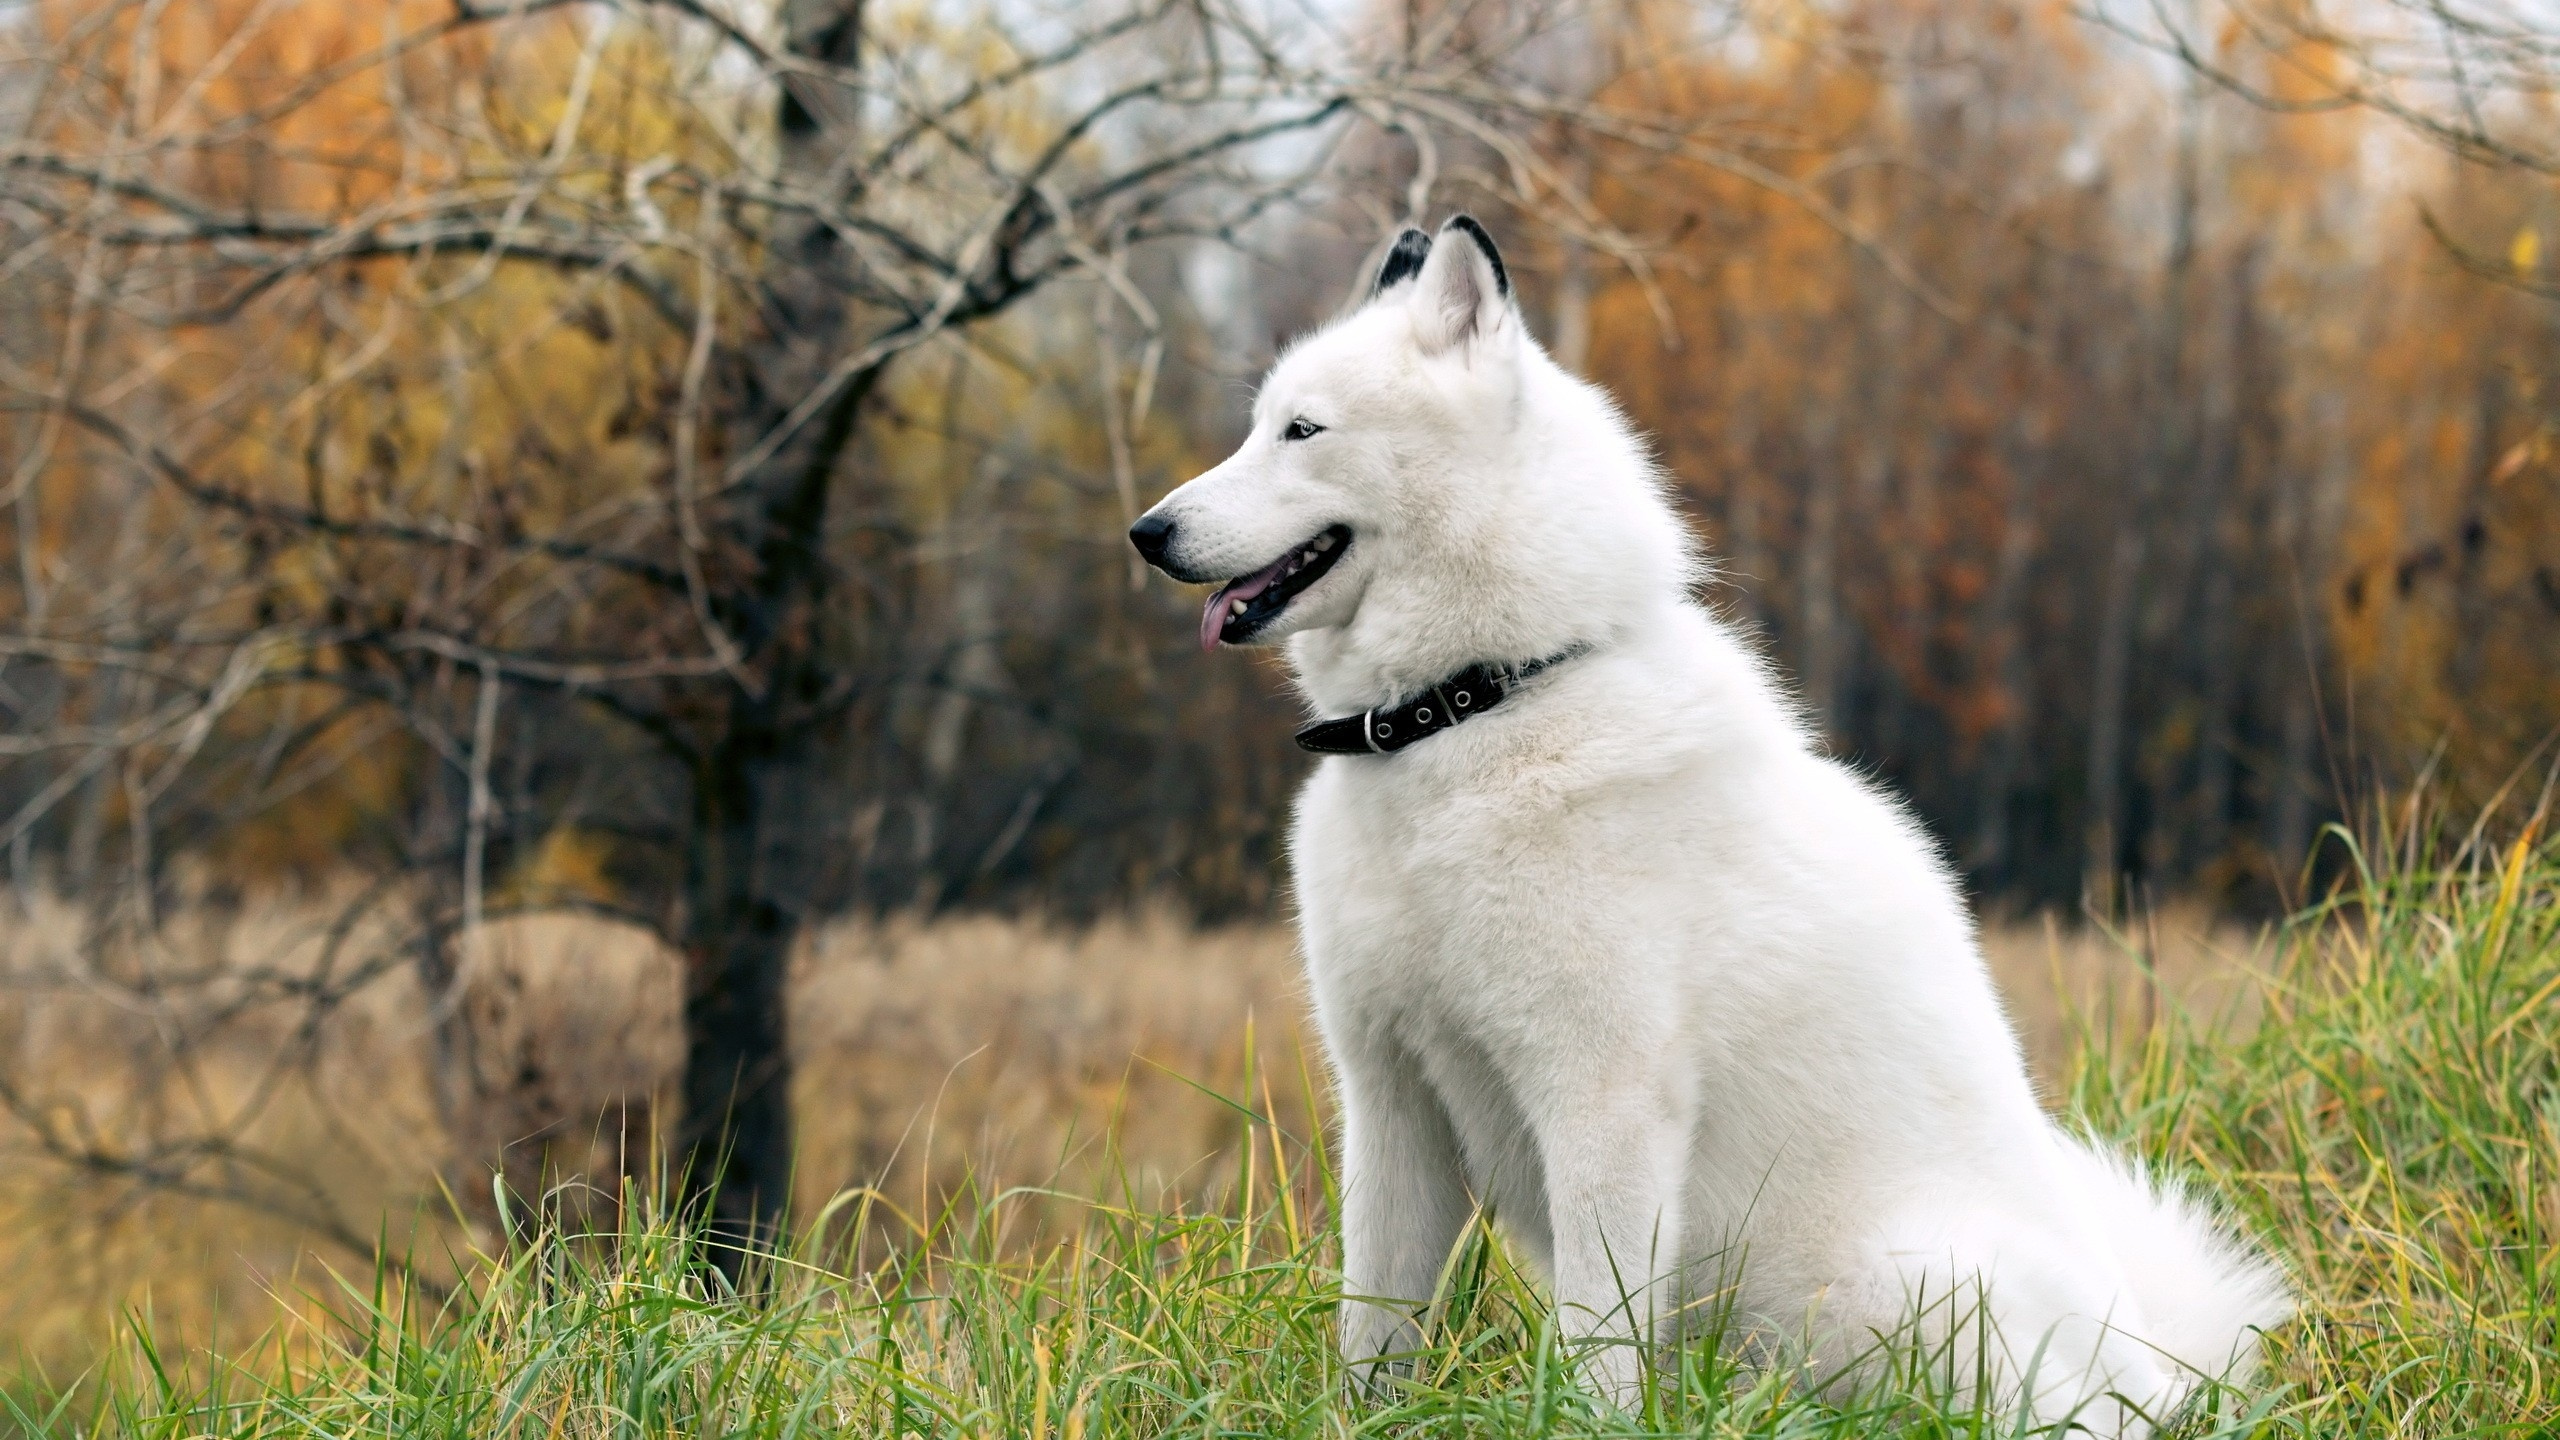 White Siberian Husky Puppy on Green Grass Field During Daytime. Wallpaper in 2560x1440 Resolution